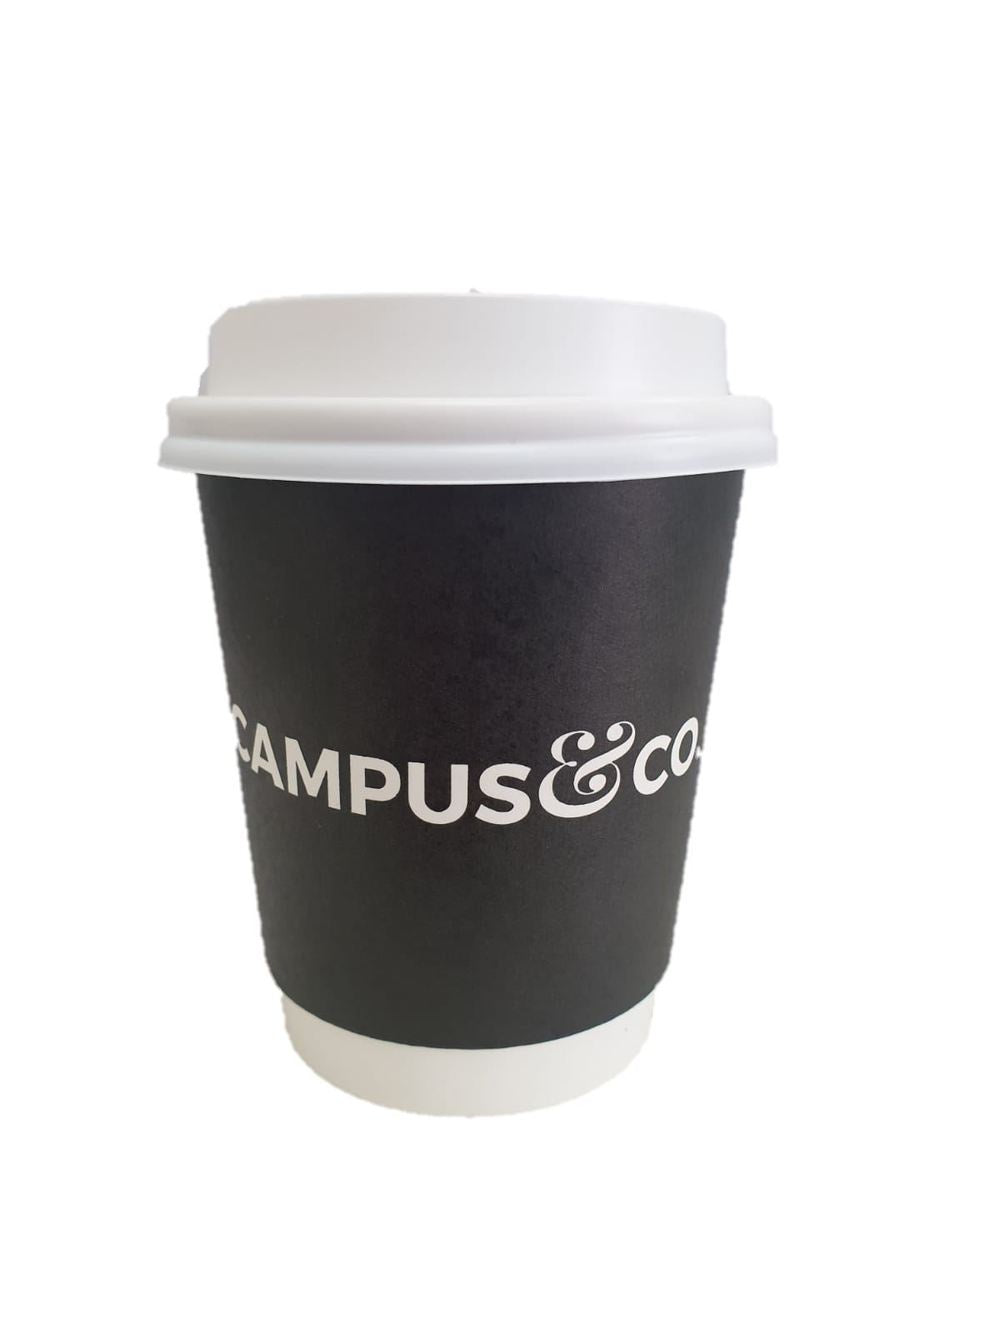 Campus & Co Disposable Double Wall Coffee Cup White Lid 50/sleeve